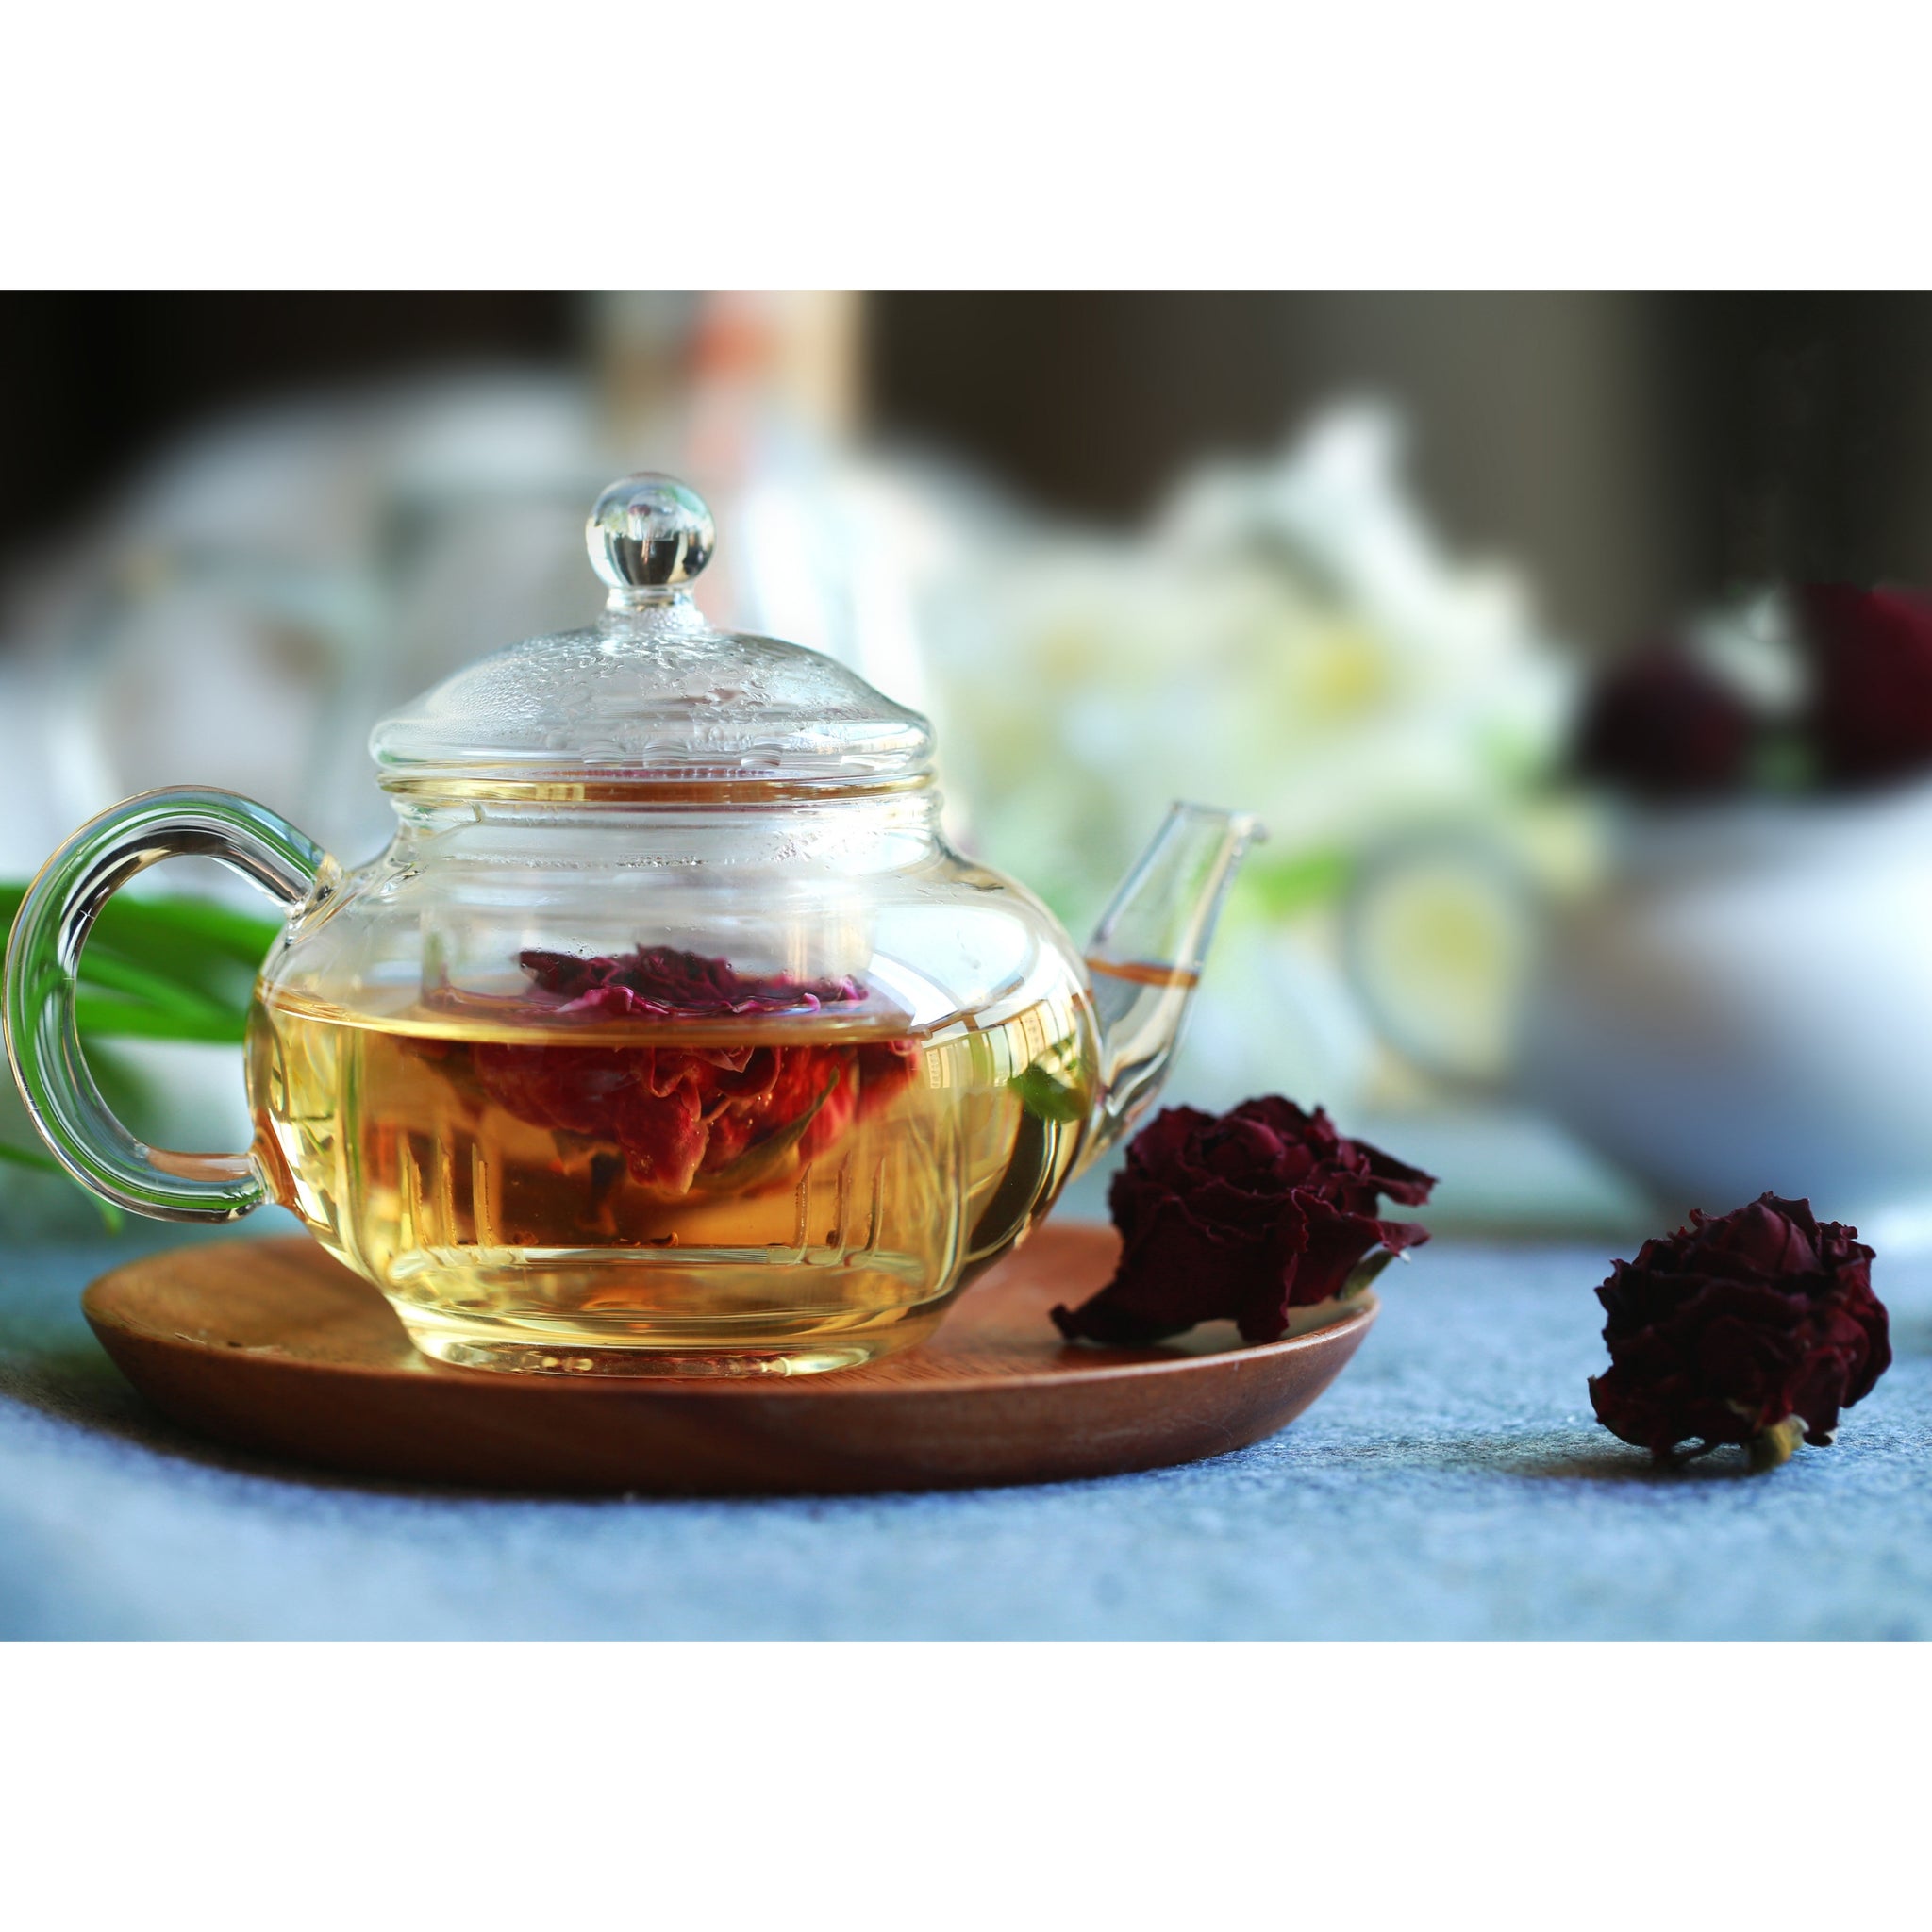 How to brew Rose Tea